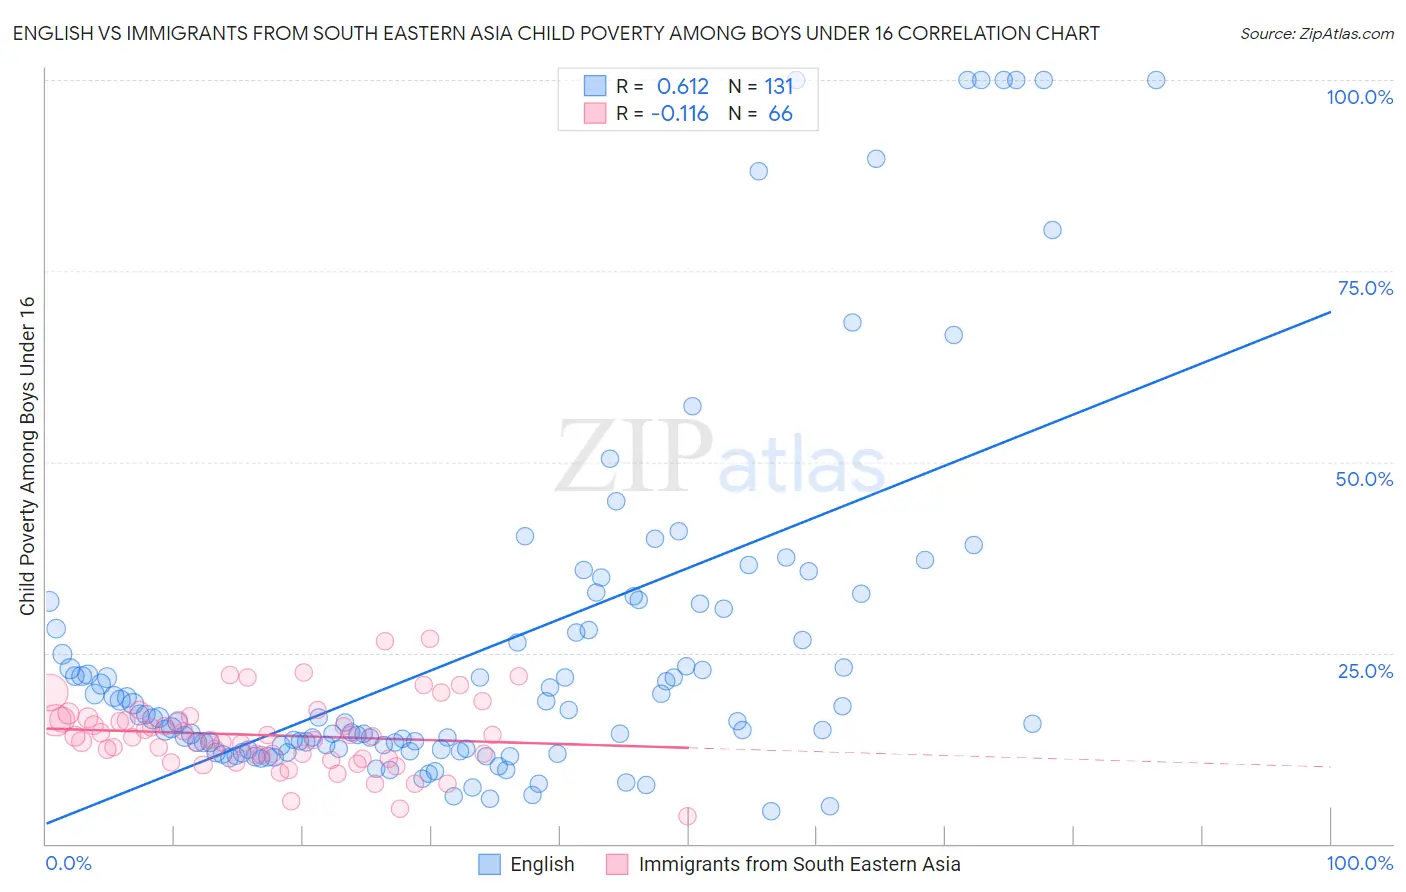 English vs Immigrants from South Eastern Asia Child Poverty Among Boys Under 16